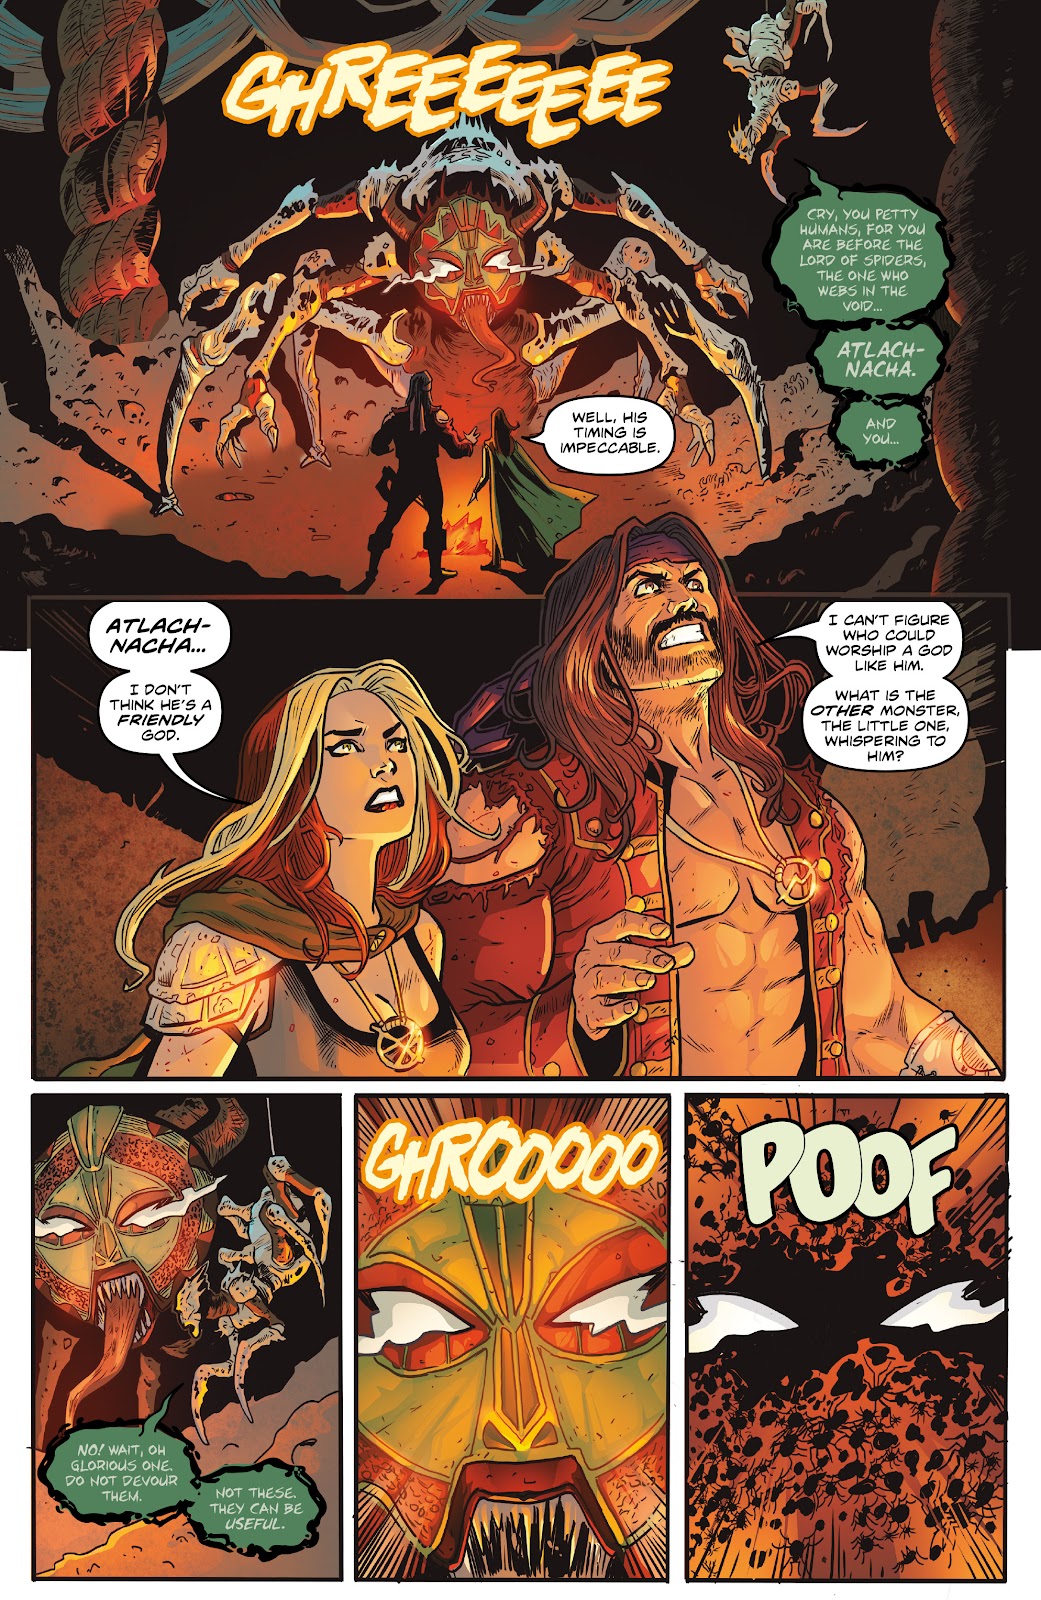 Rogues!: The Burning Heart issue 5 - Page 8